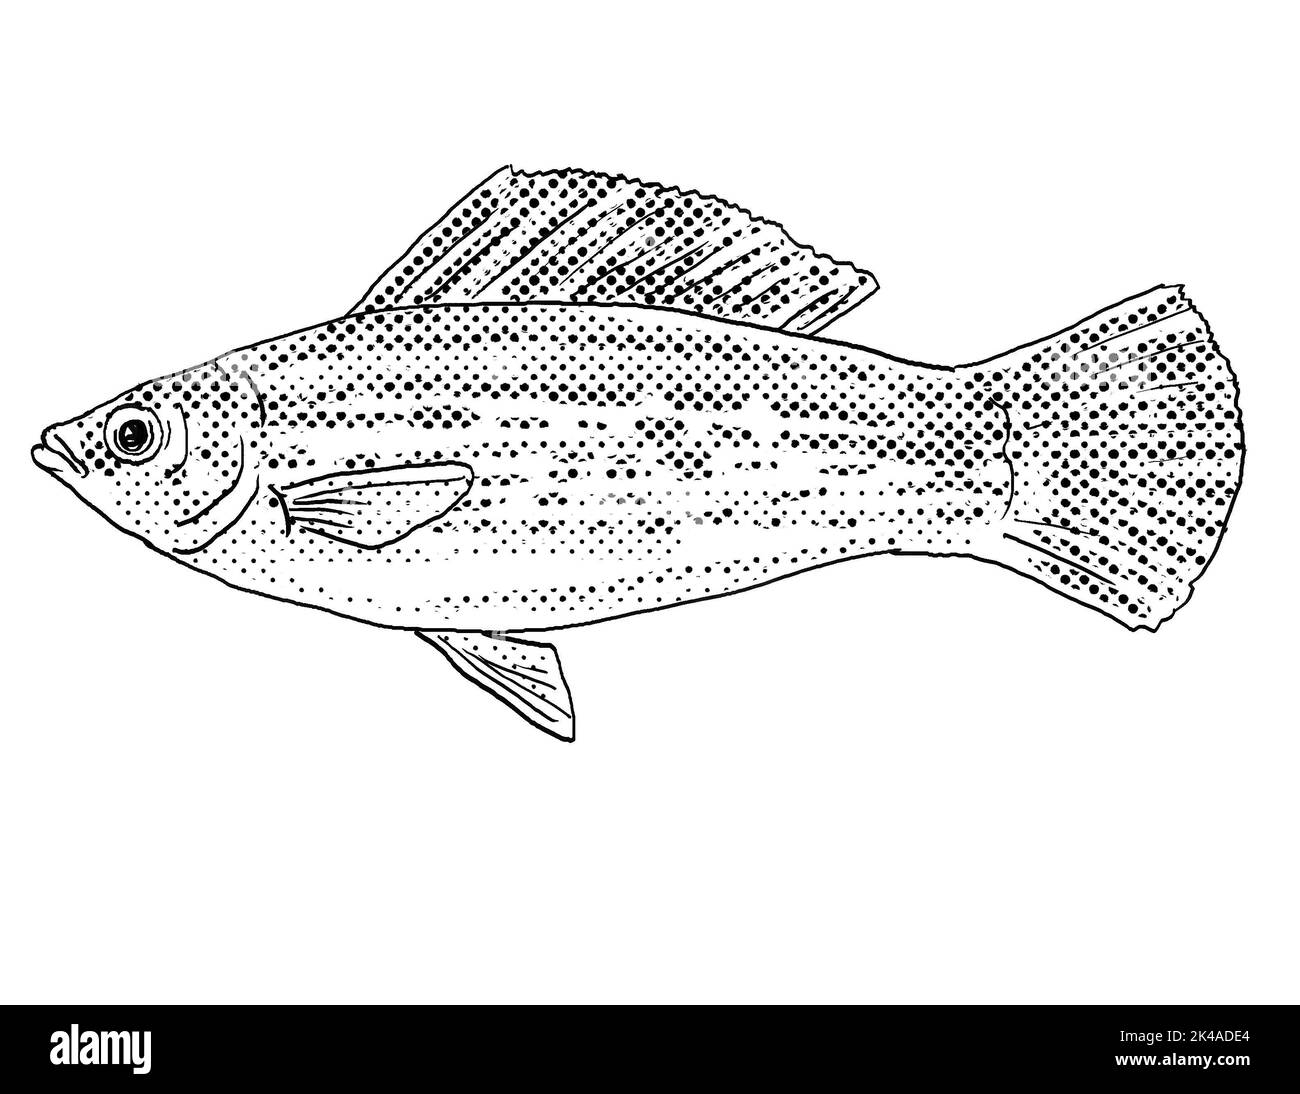 Cartoon style line drawing of a sailfin molly or Poecilia latipinna a freshwater fish endemic to North America with halftone dots shading. Stock Photo